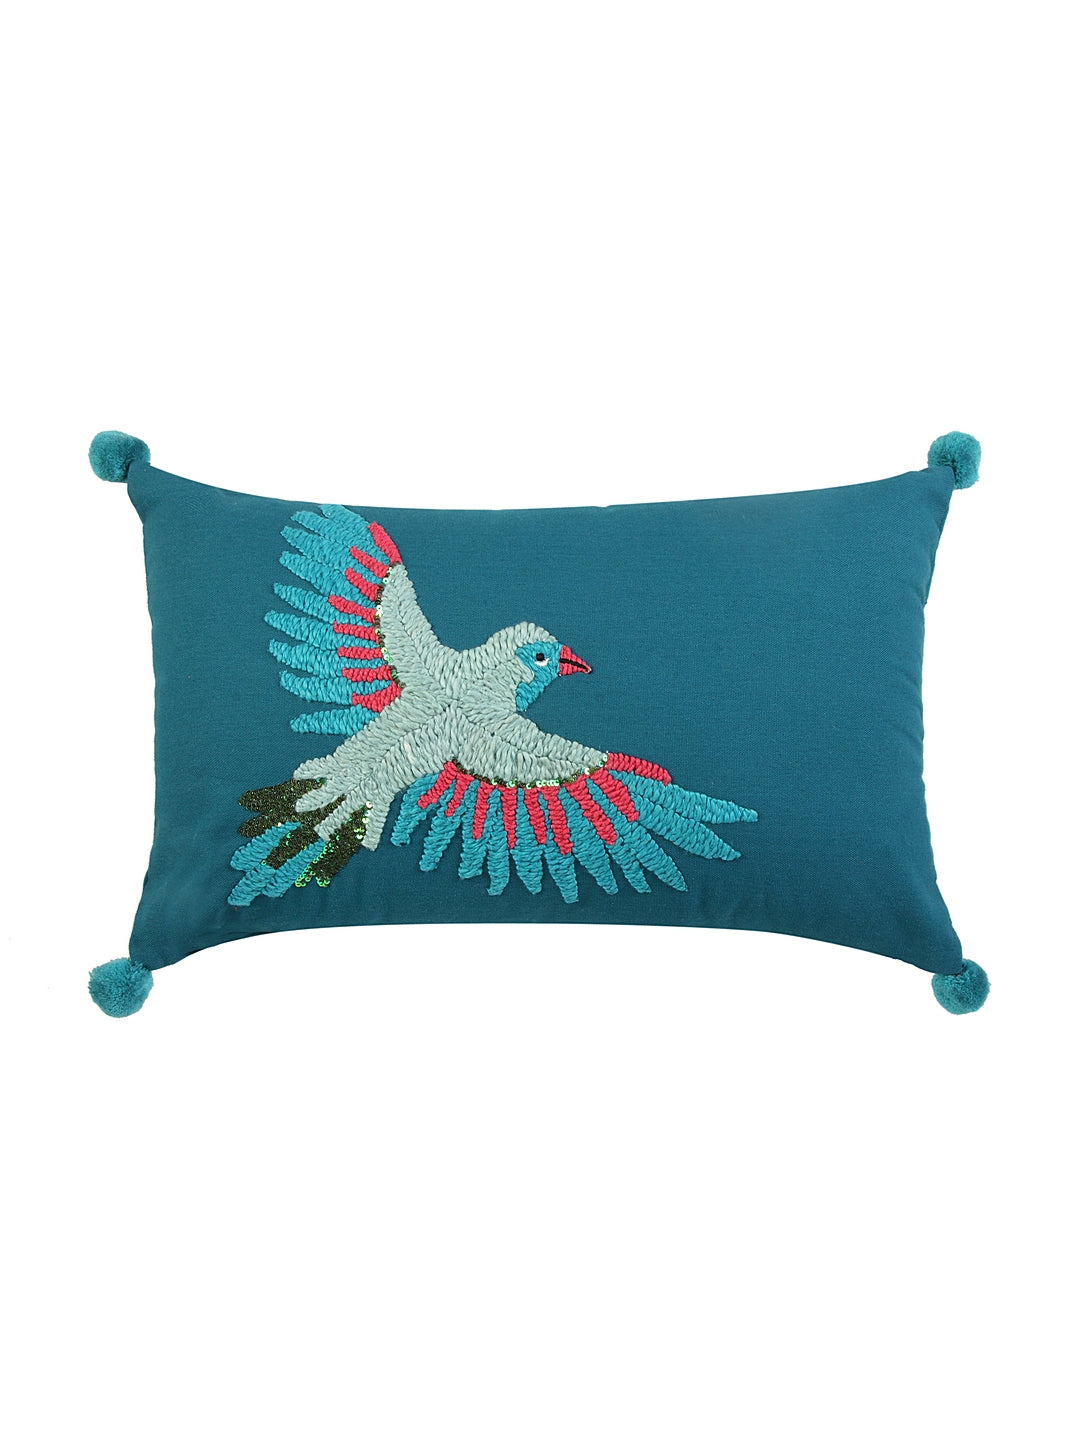 Royal Crest Cushion Cover with Filler 30x50cm